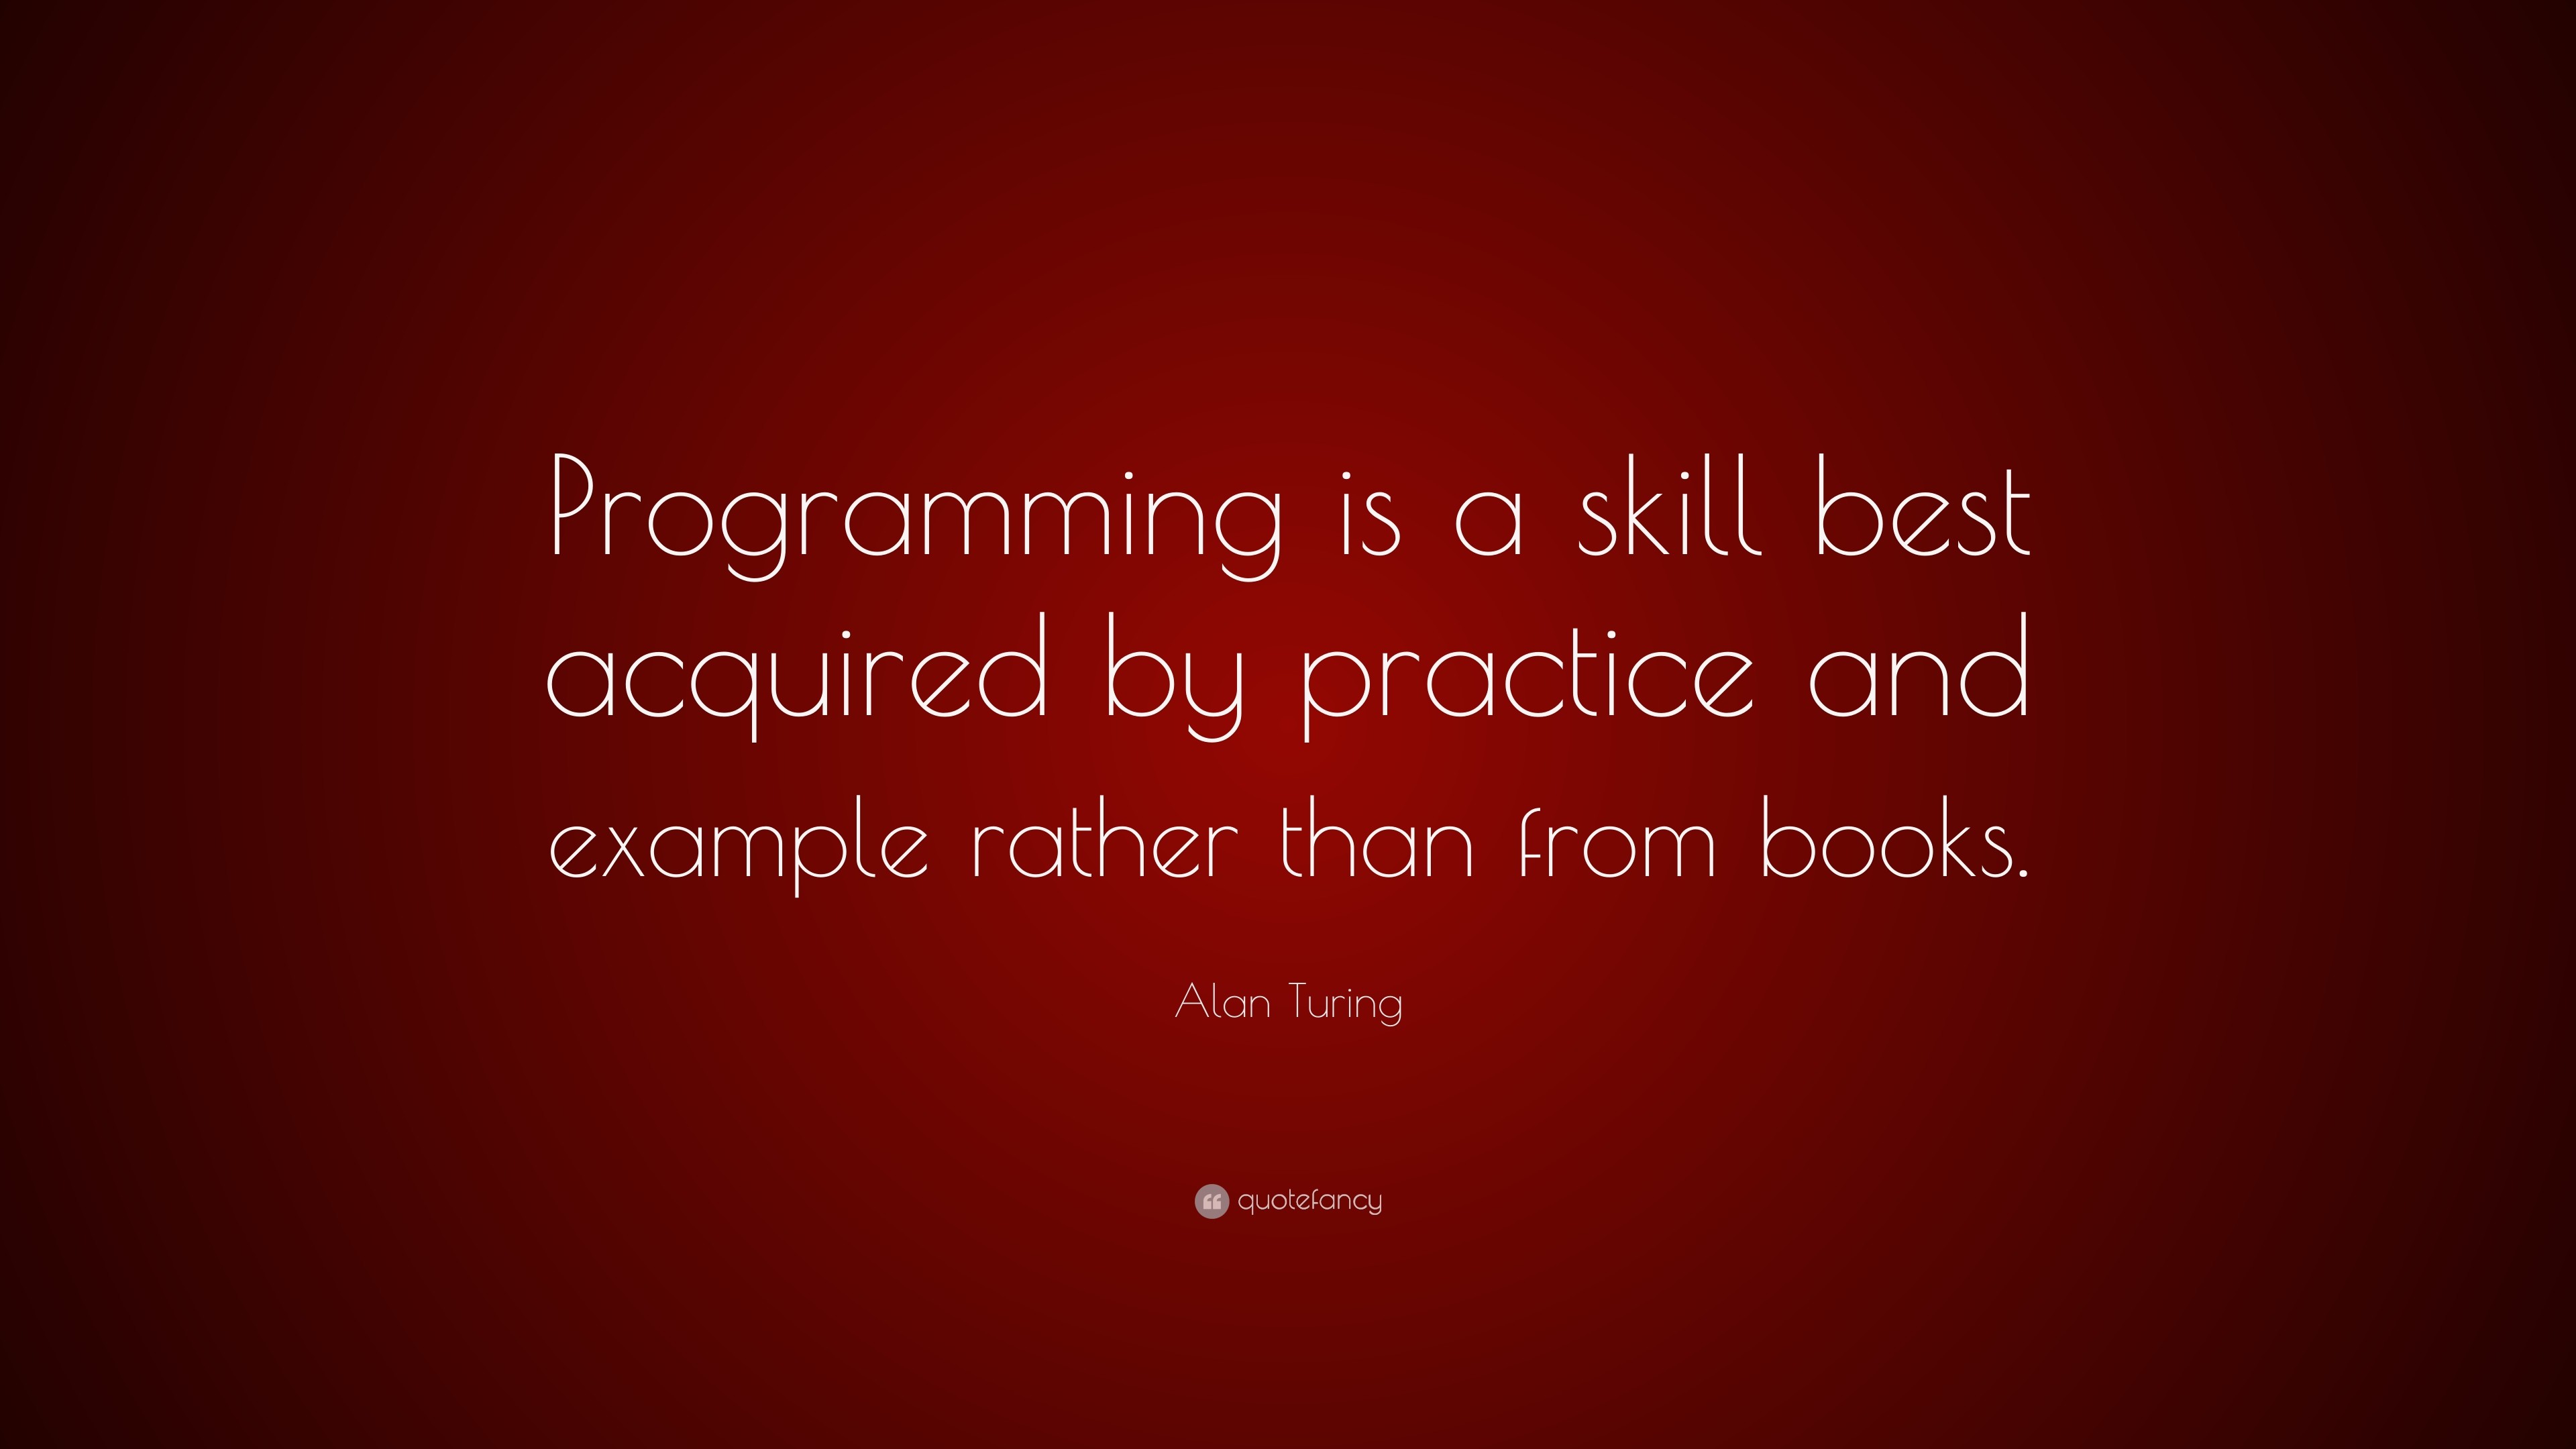 3840x2160 Alan Turing Quote: “Programming is a skill best acquired by practice and  example rather